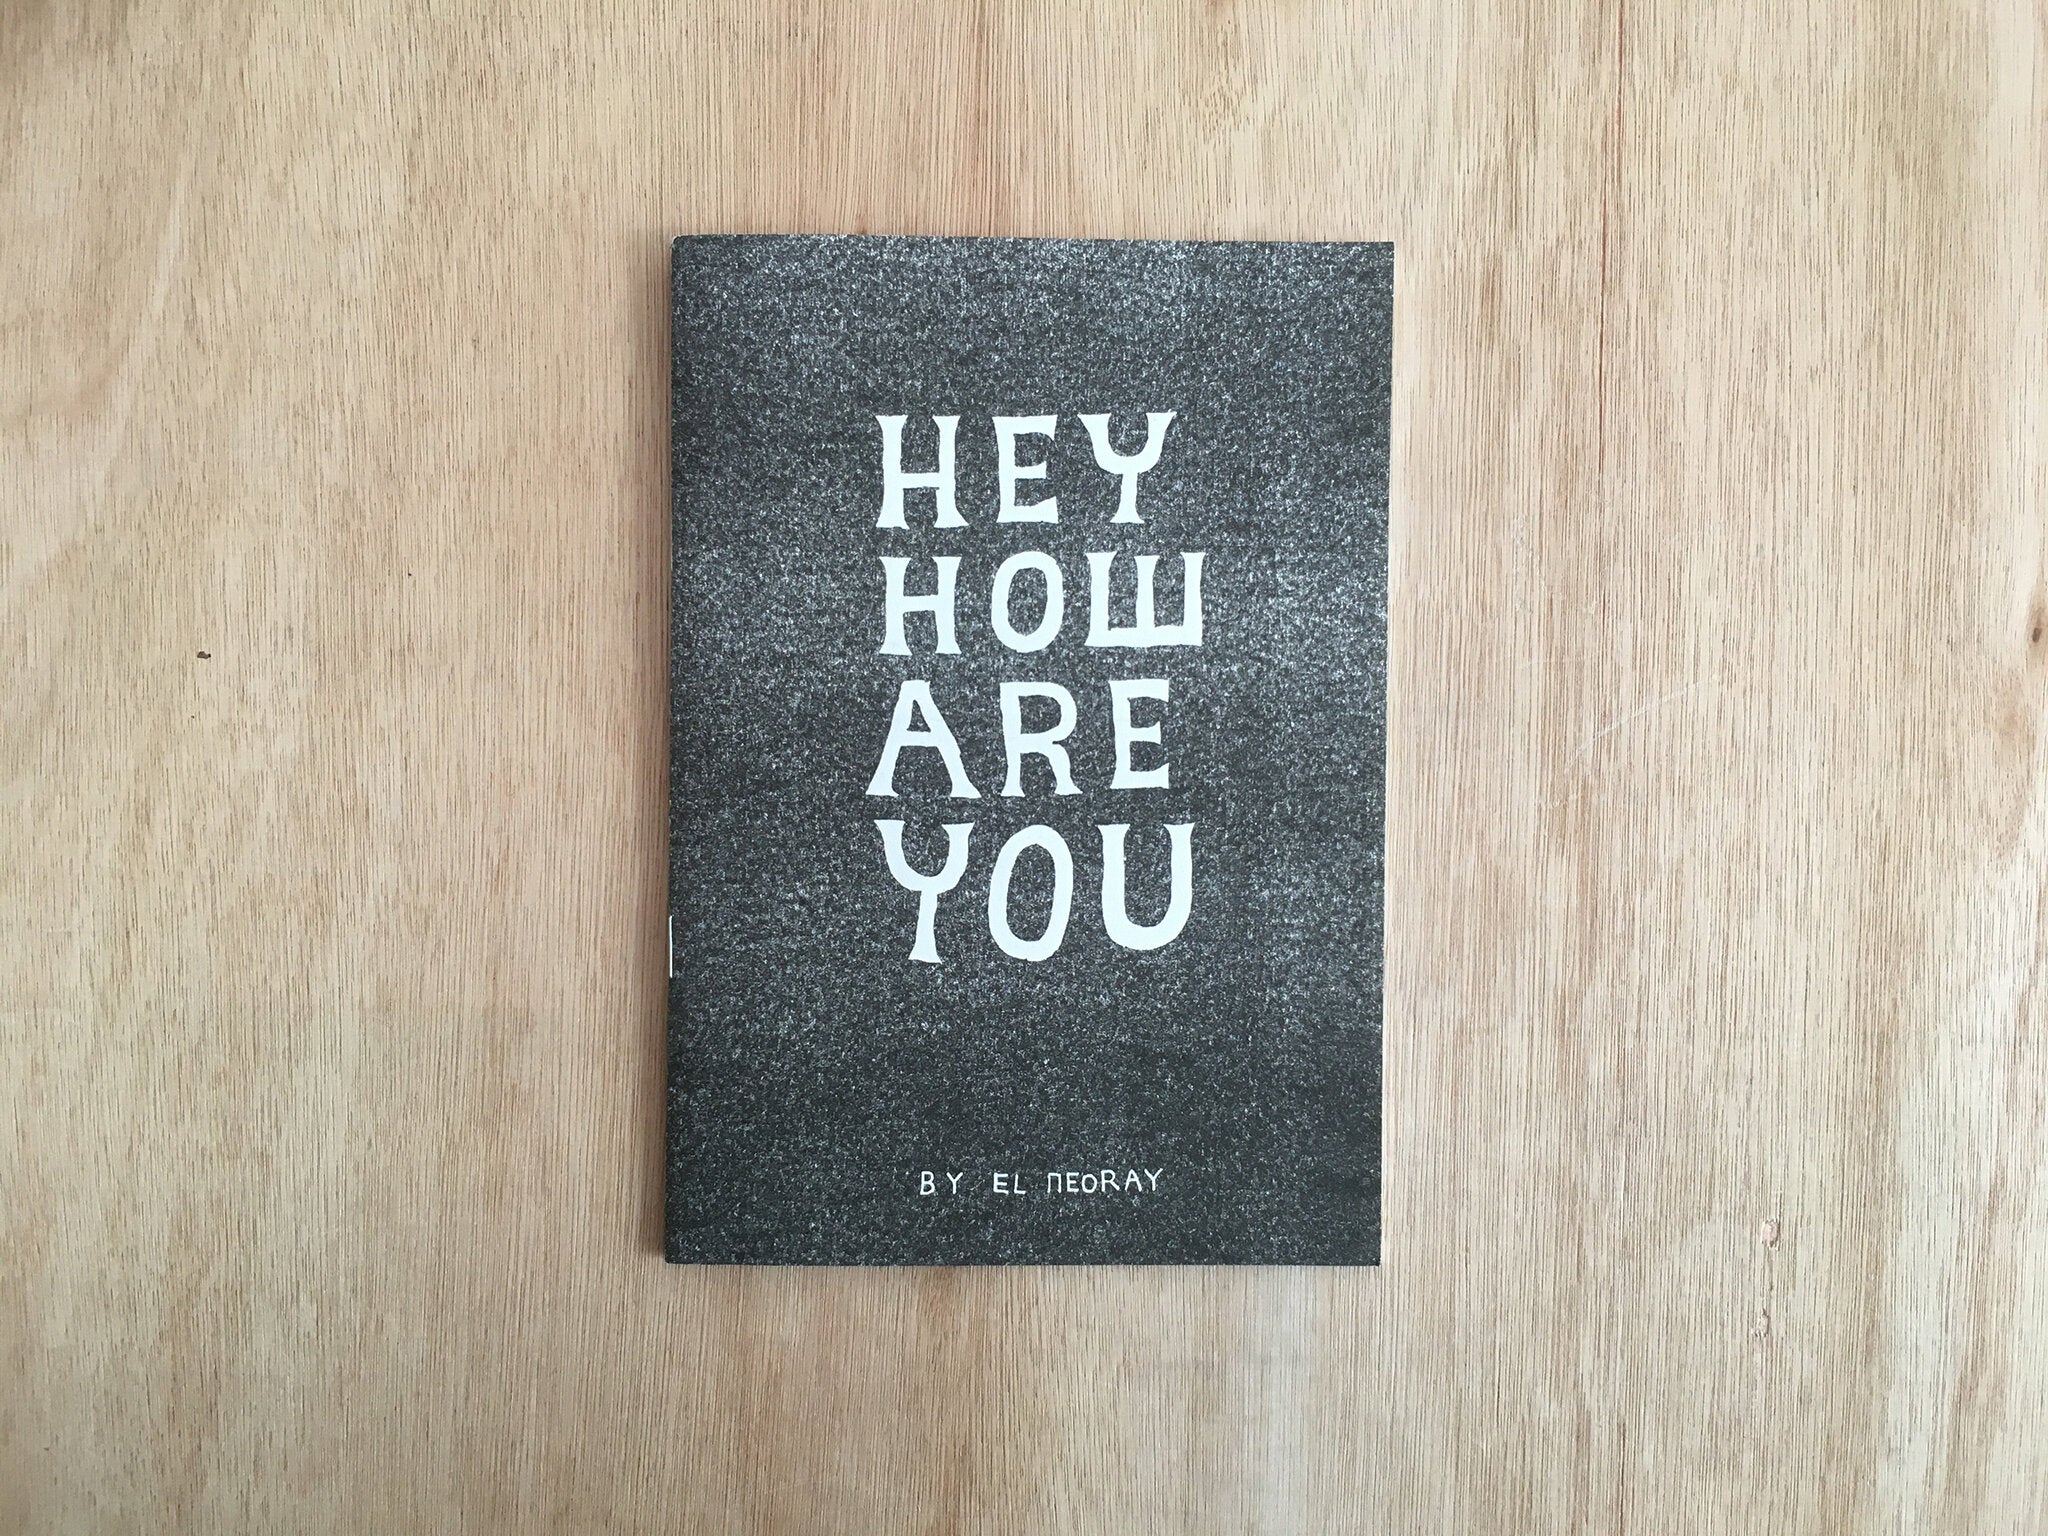 HEY HOW ARE YOU by El Neoray